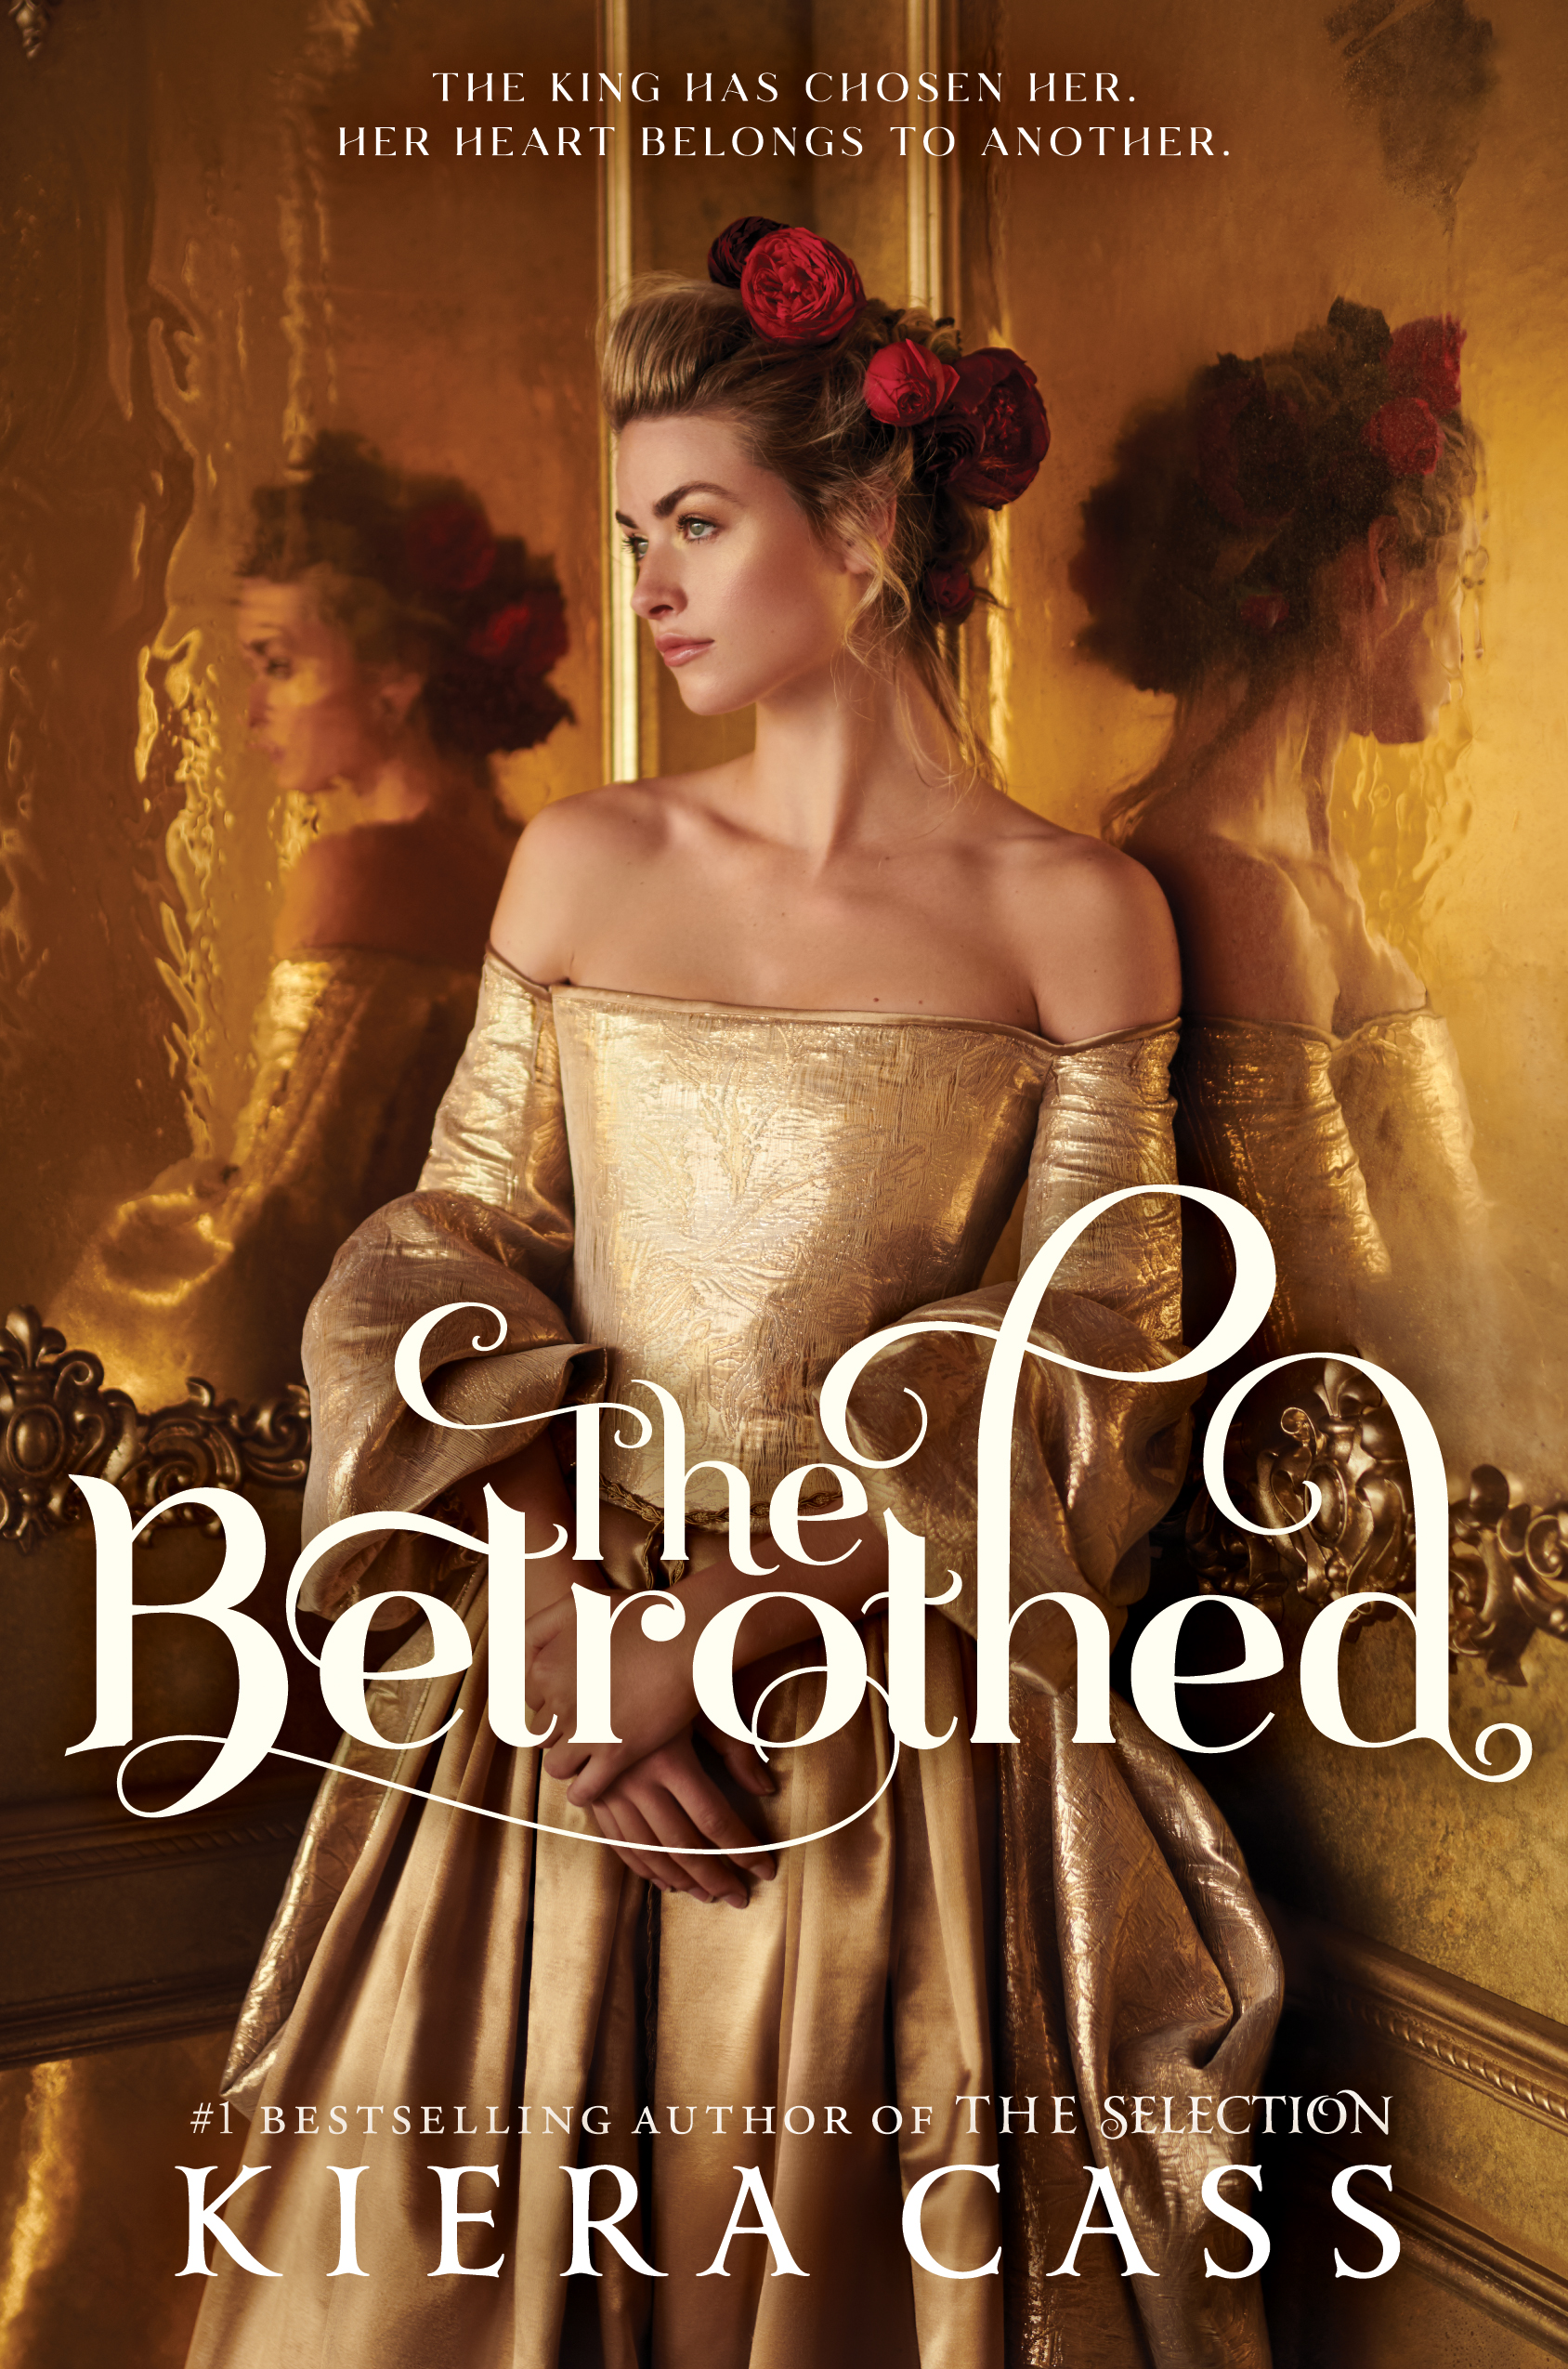 Book cover for The Betrothed by Kiera Cass.